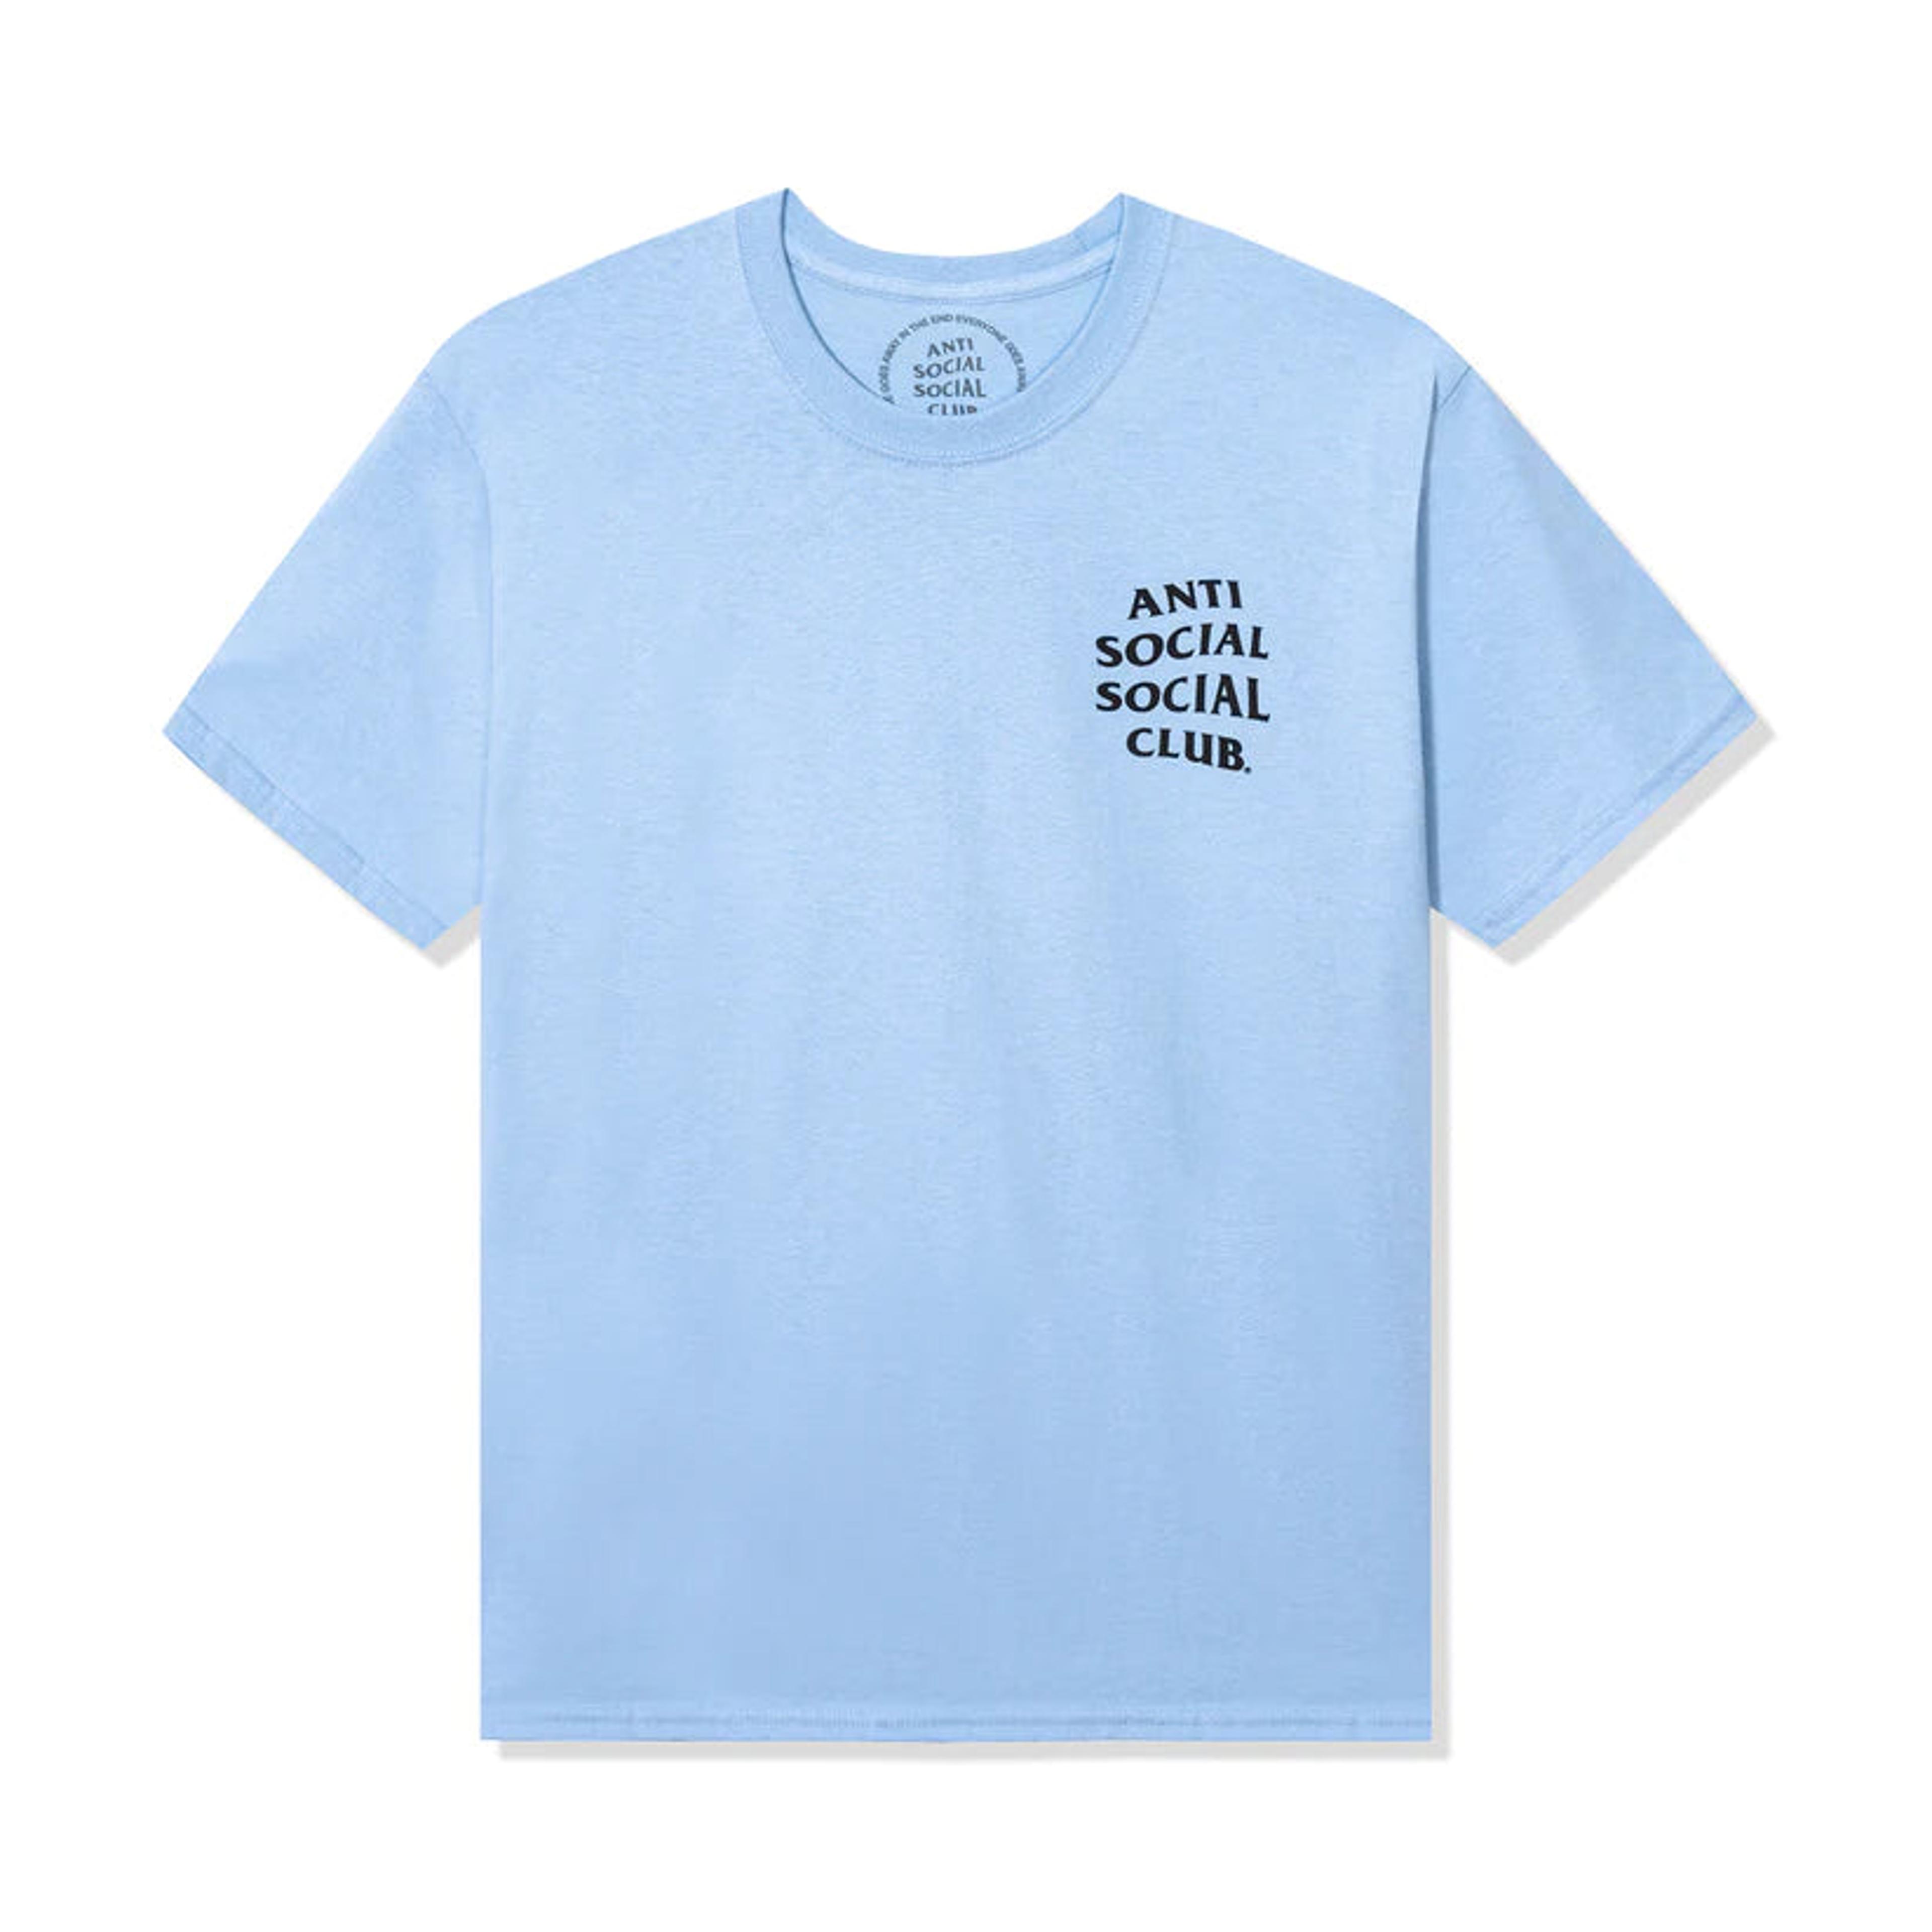 Alternate View 1 of Anti Social Social Club Mind Game Blue Tee ASSC DS Brand New